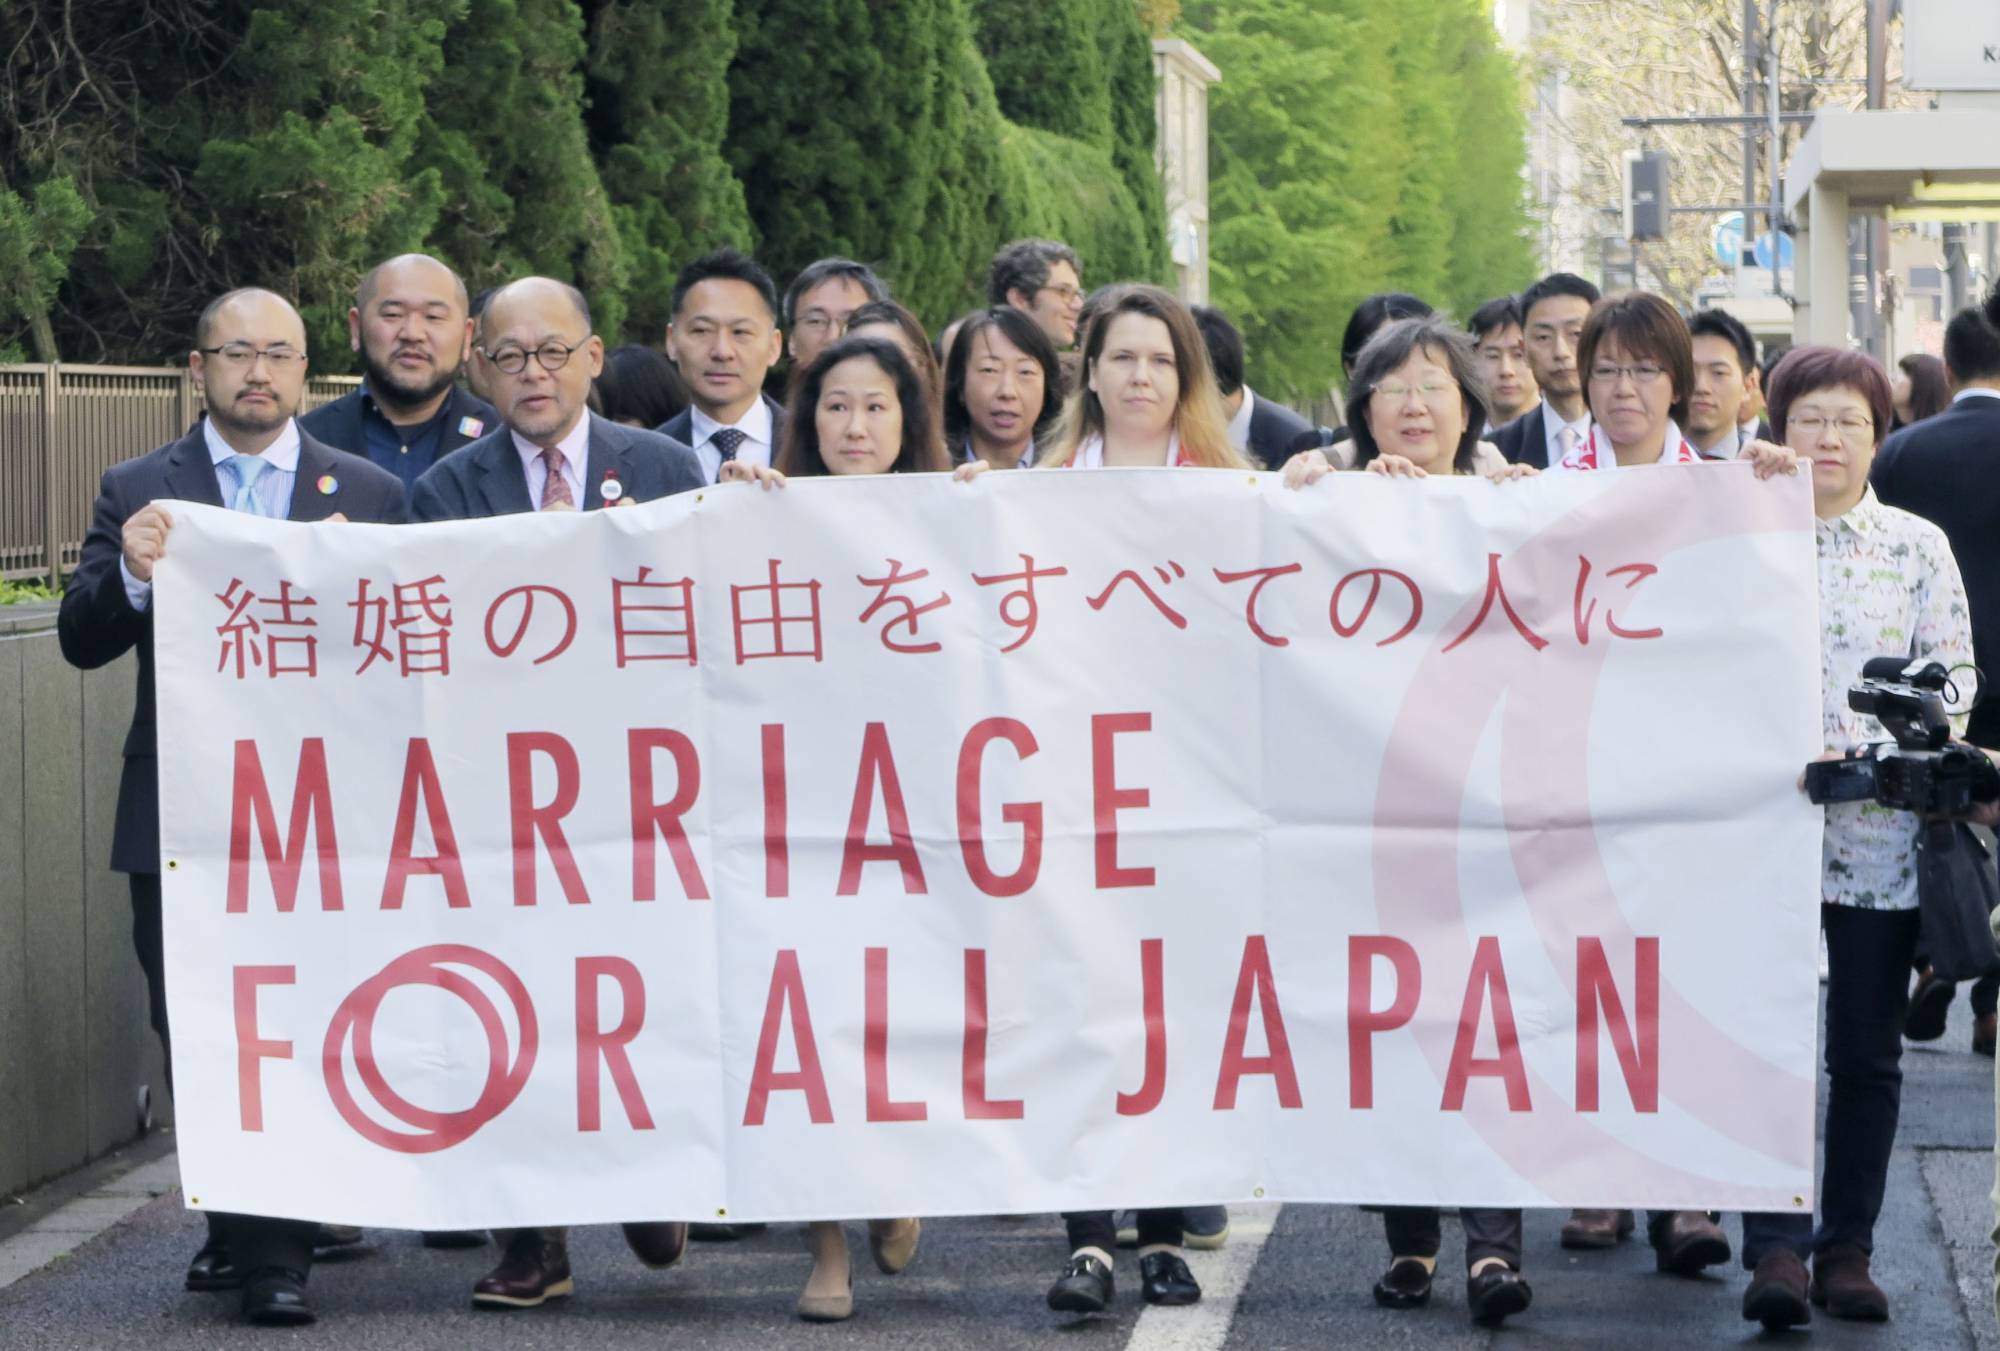 Japan NGO offers same-sex partnership certificates to address gaps in current provision